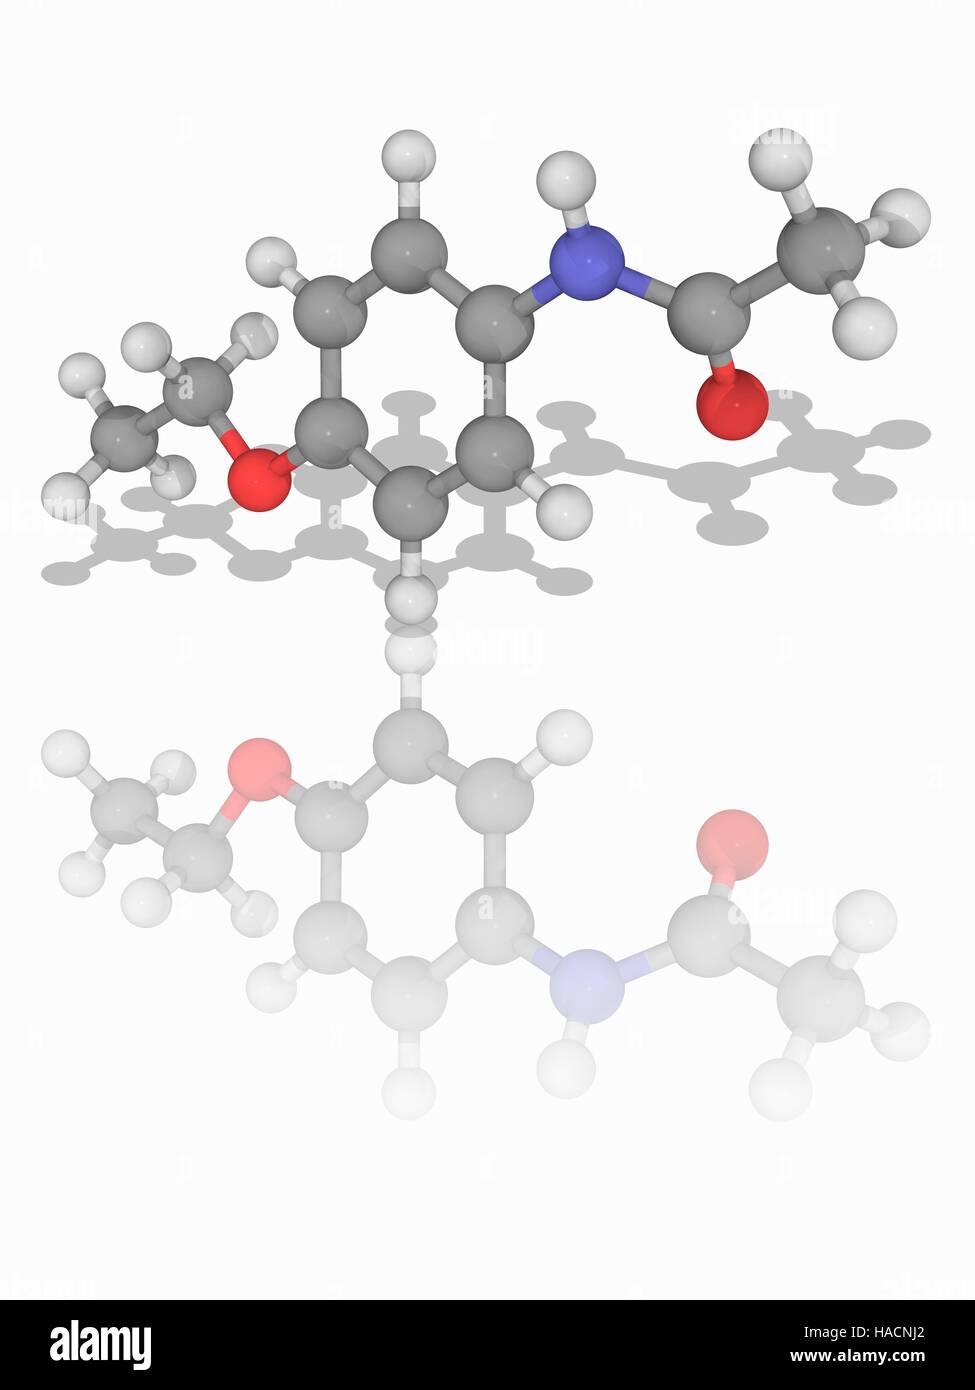 Phenacetin. Molecular model of the analgesic drug phenacetin (C10.H13.N.O2). This use of this drug has declined because of its adverse effects. Atoms are represented as spheres and are colour-coded: carbon (grey), hydrogen (white), nitrogen (blue) and oxygen (red). Illustration. Stock Photo